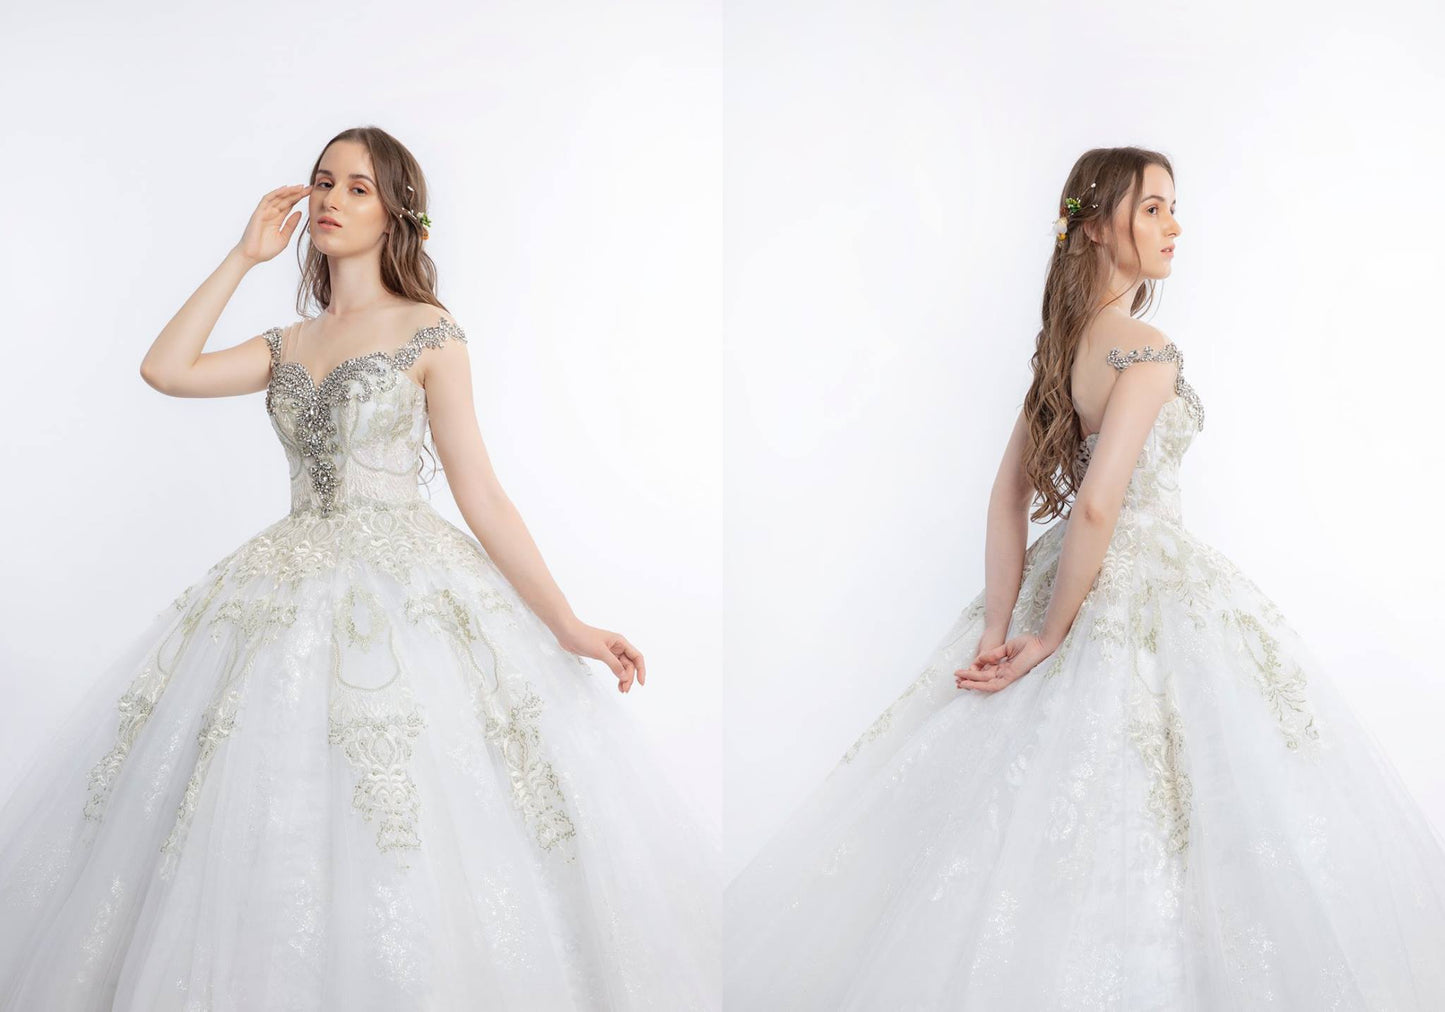 Phoebe - Sparkling Princess Ball Gown Wedding Dress: Exquisite Corset with Premium Lace Embellishments